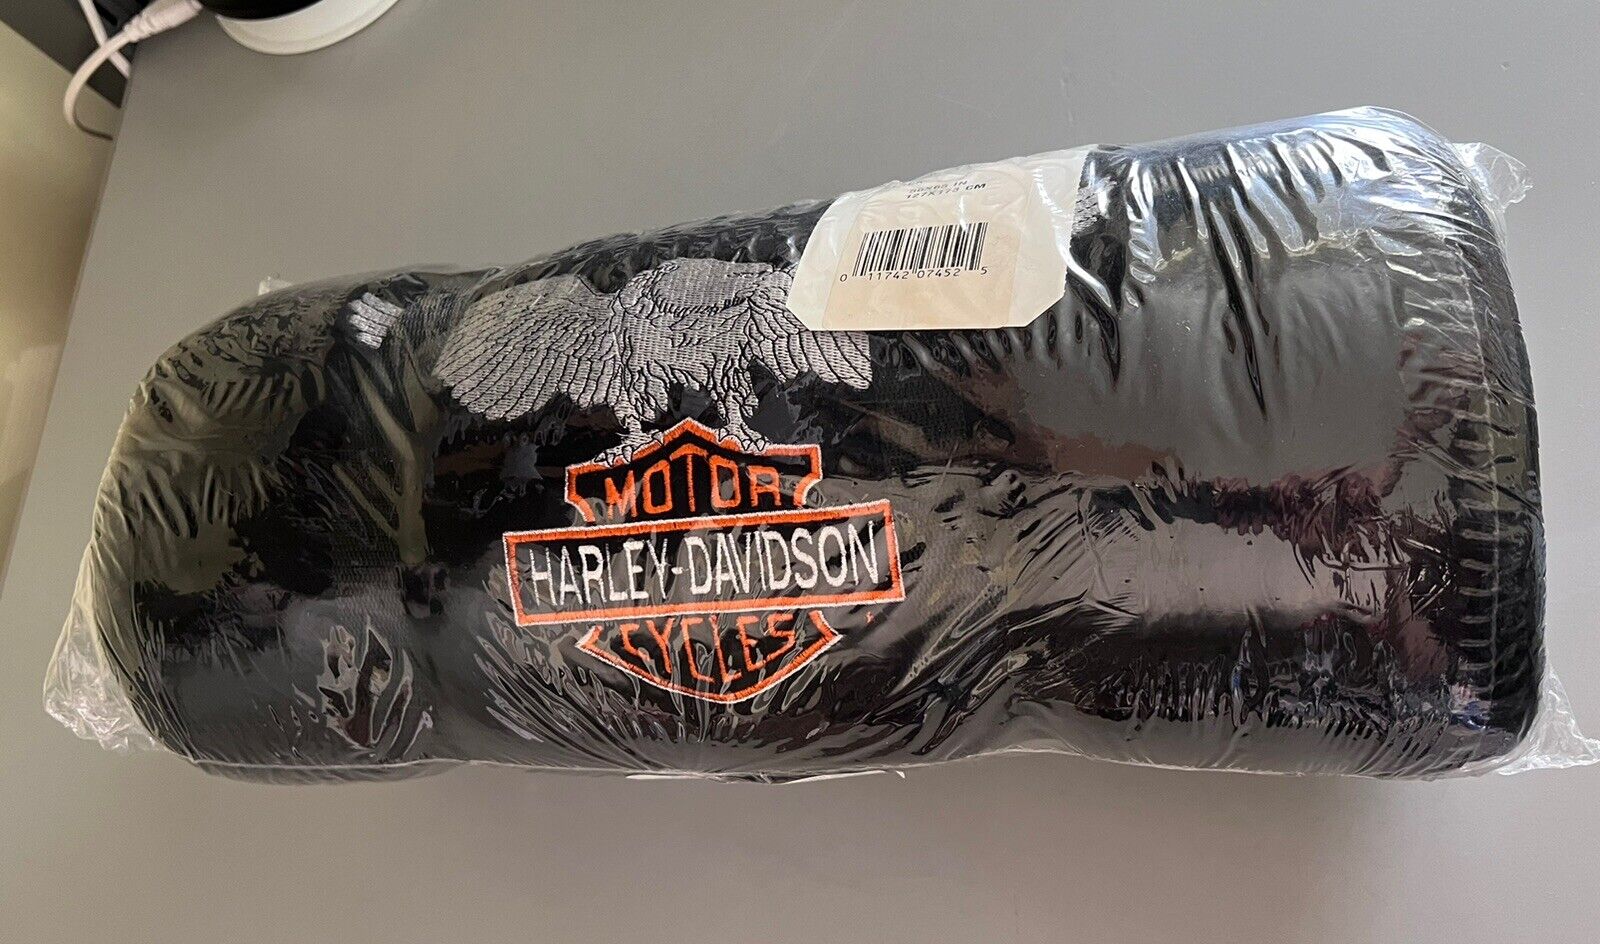 Harley Davidson embroidered Flying Eagle logo Throw Blanket 50x68 inch, New